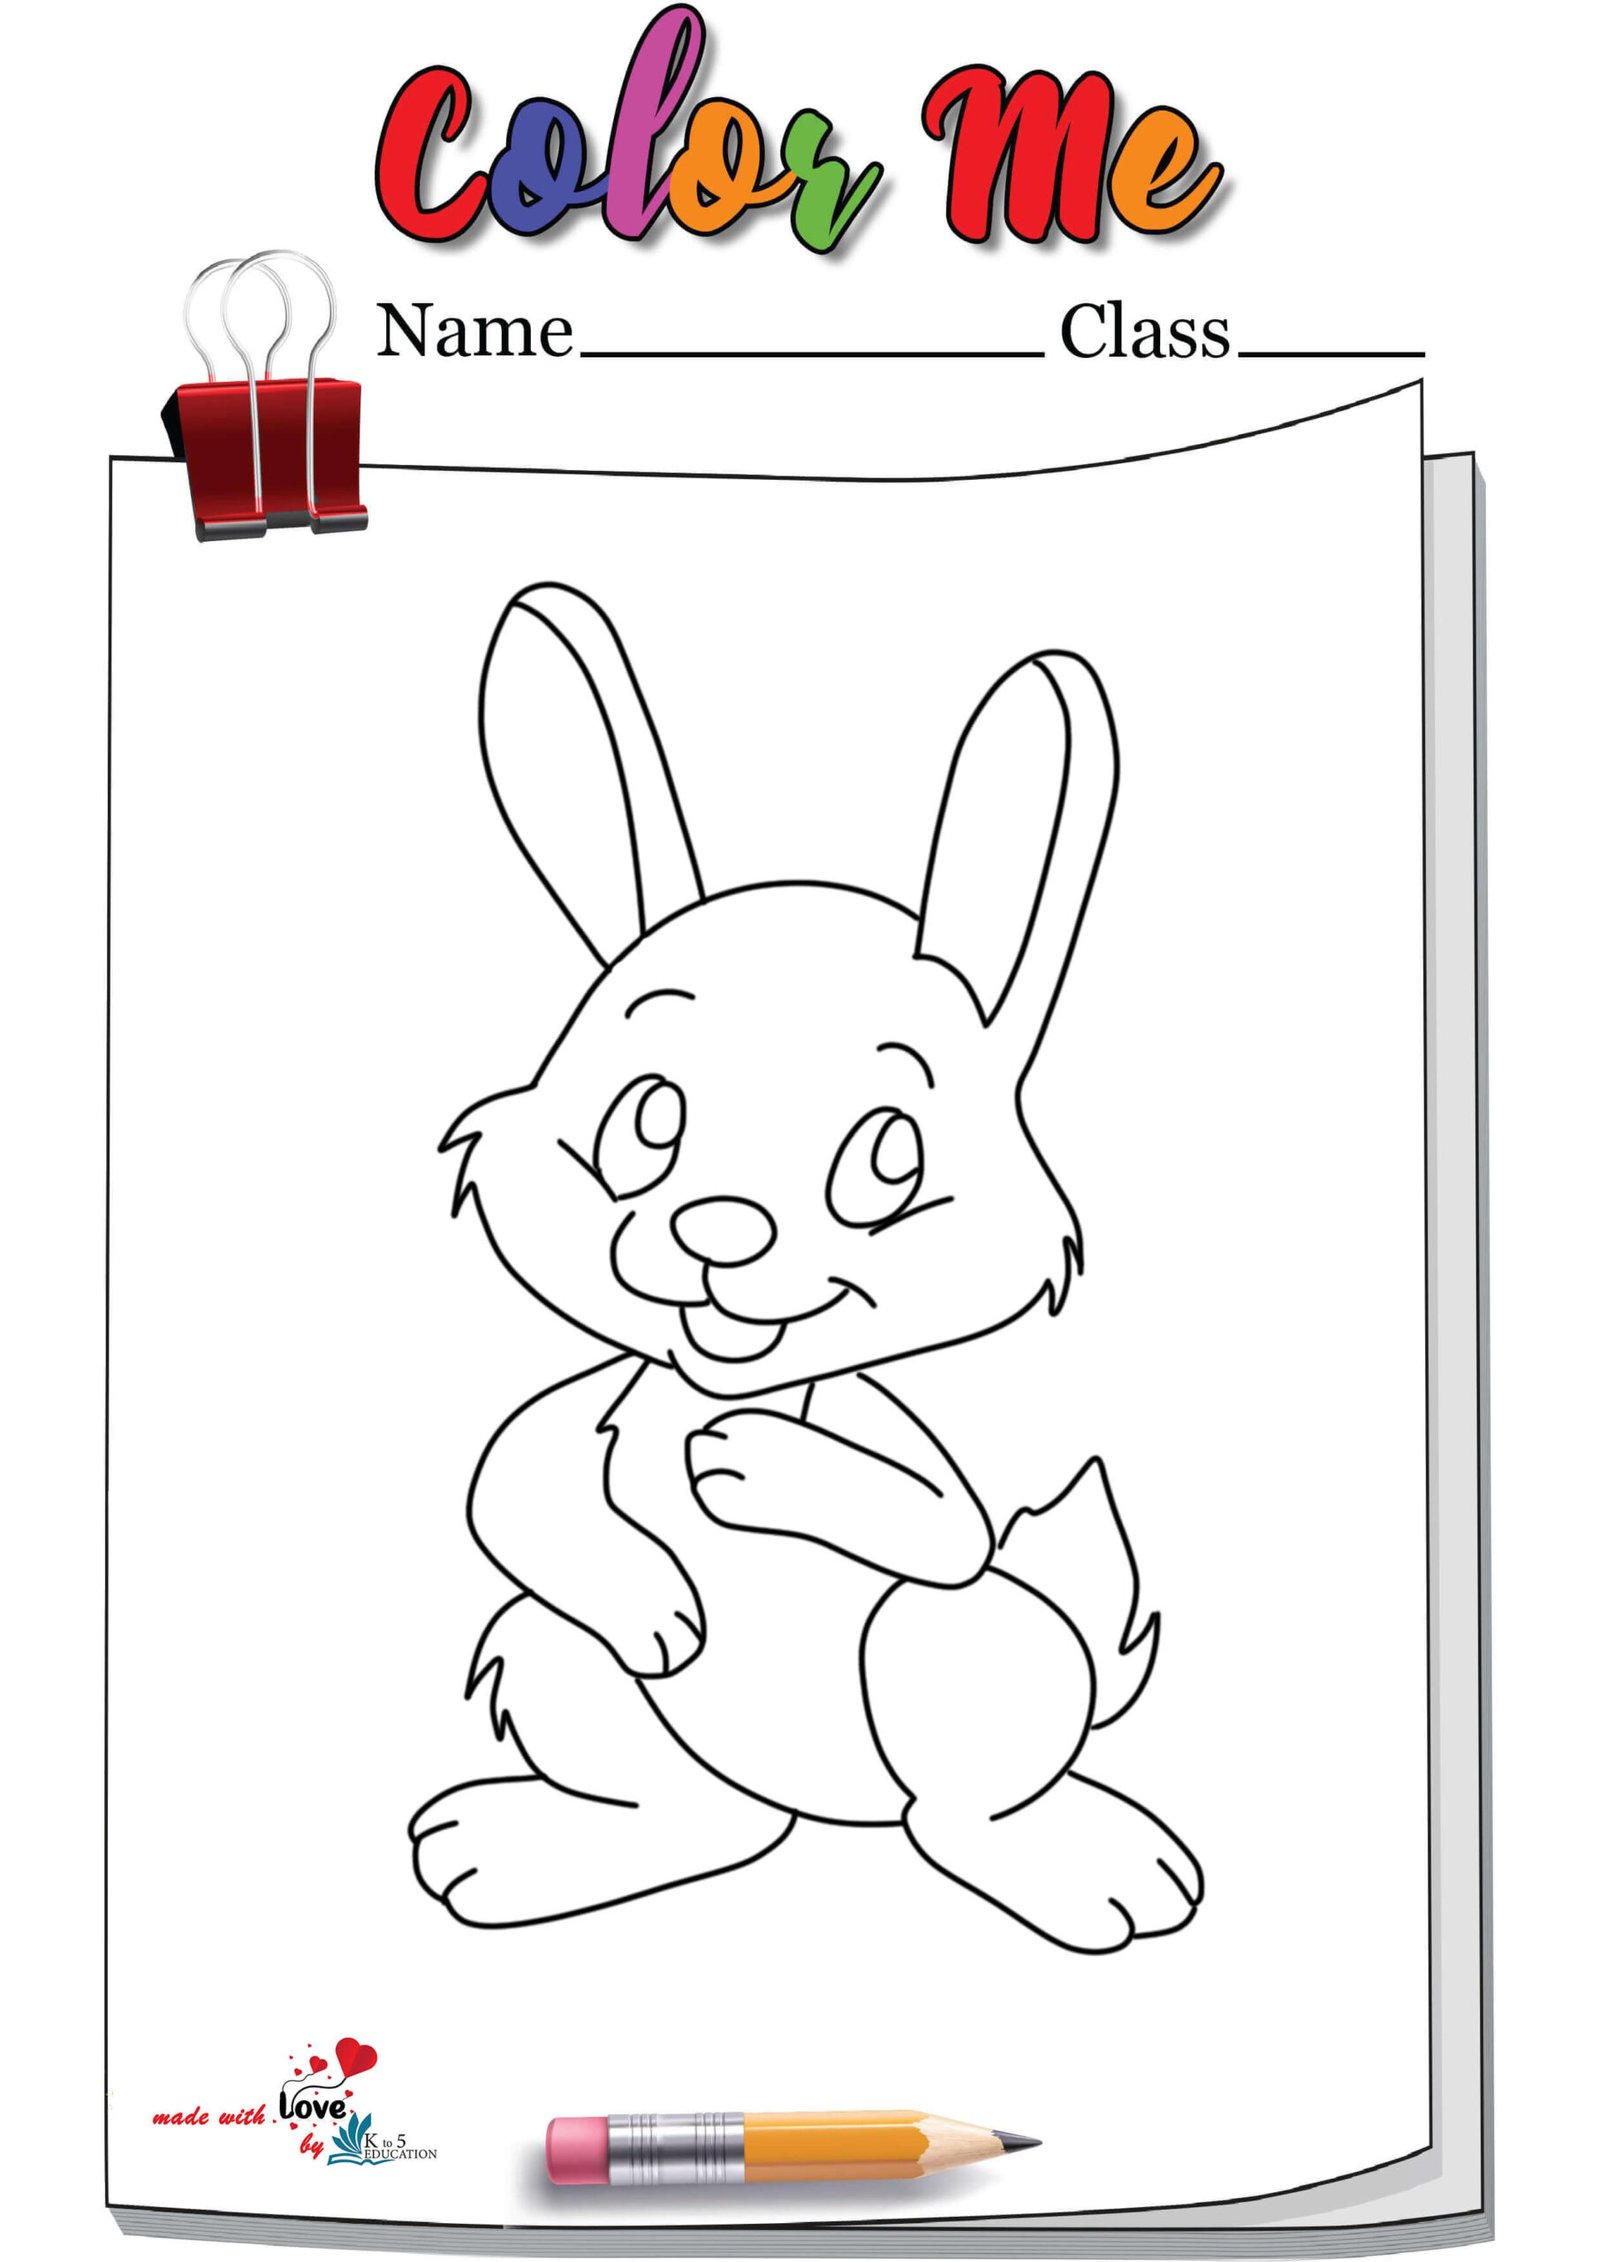 Bunny Smiling Coloring Page